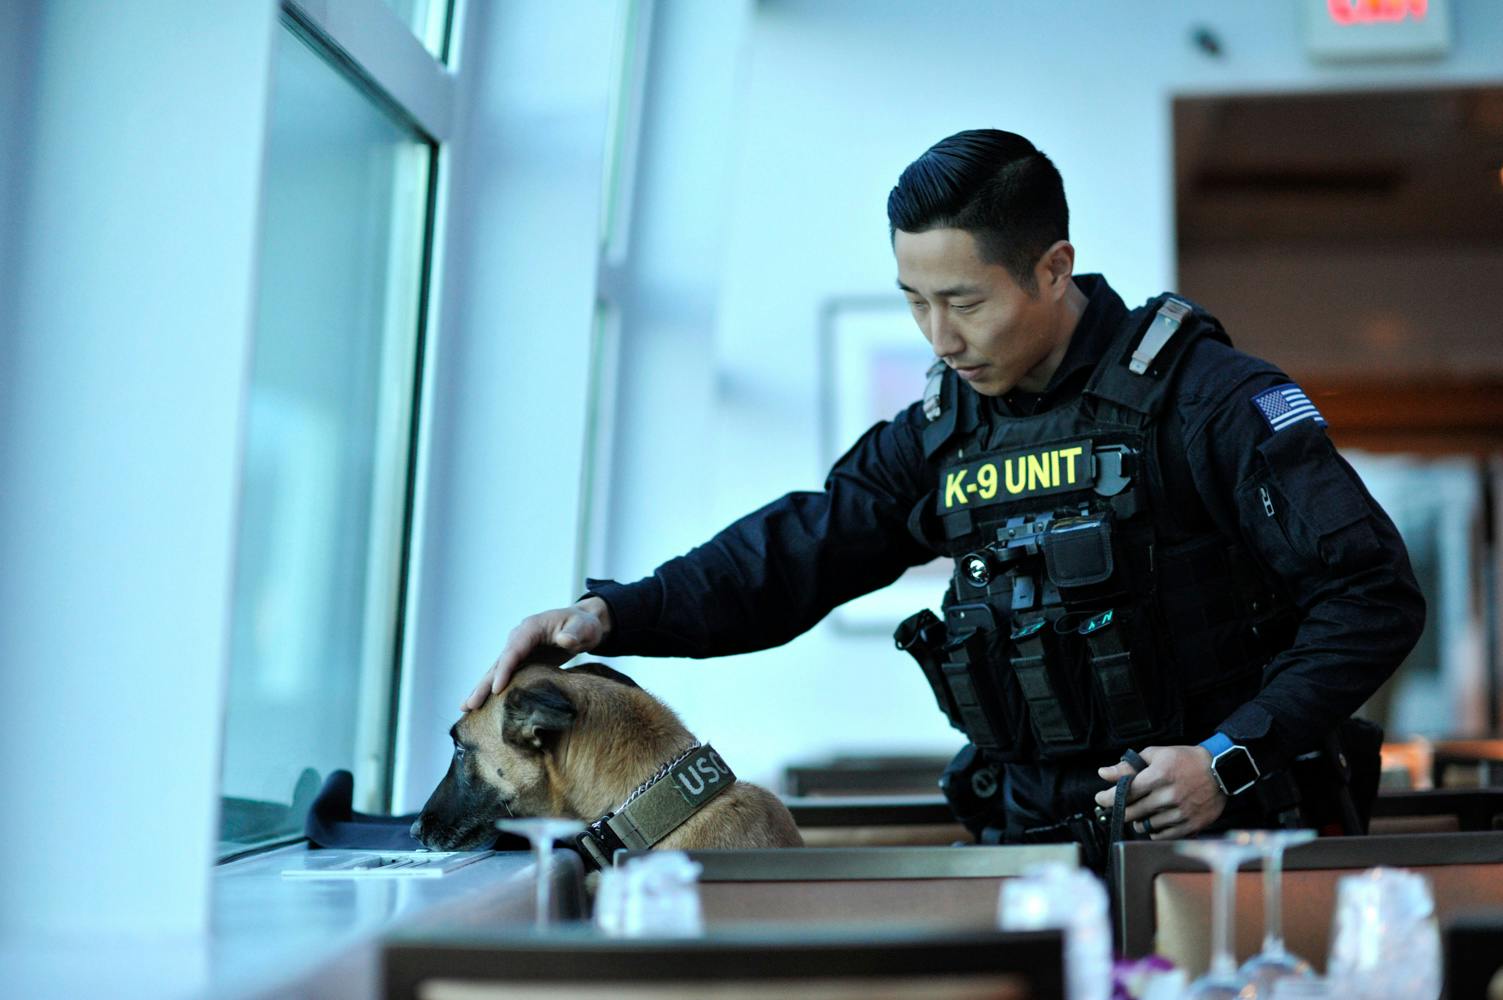 Illinois Cops Claim If Weed Is Legalized Theyll Have To Kill Their Police Dogs 2 Illinois police claim that cannabis legalization will force them to euthanize K 9 police dogs